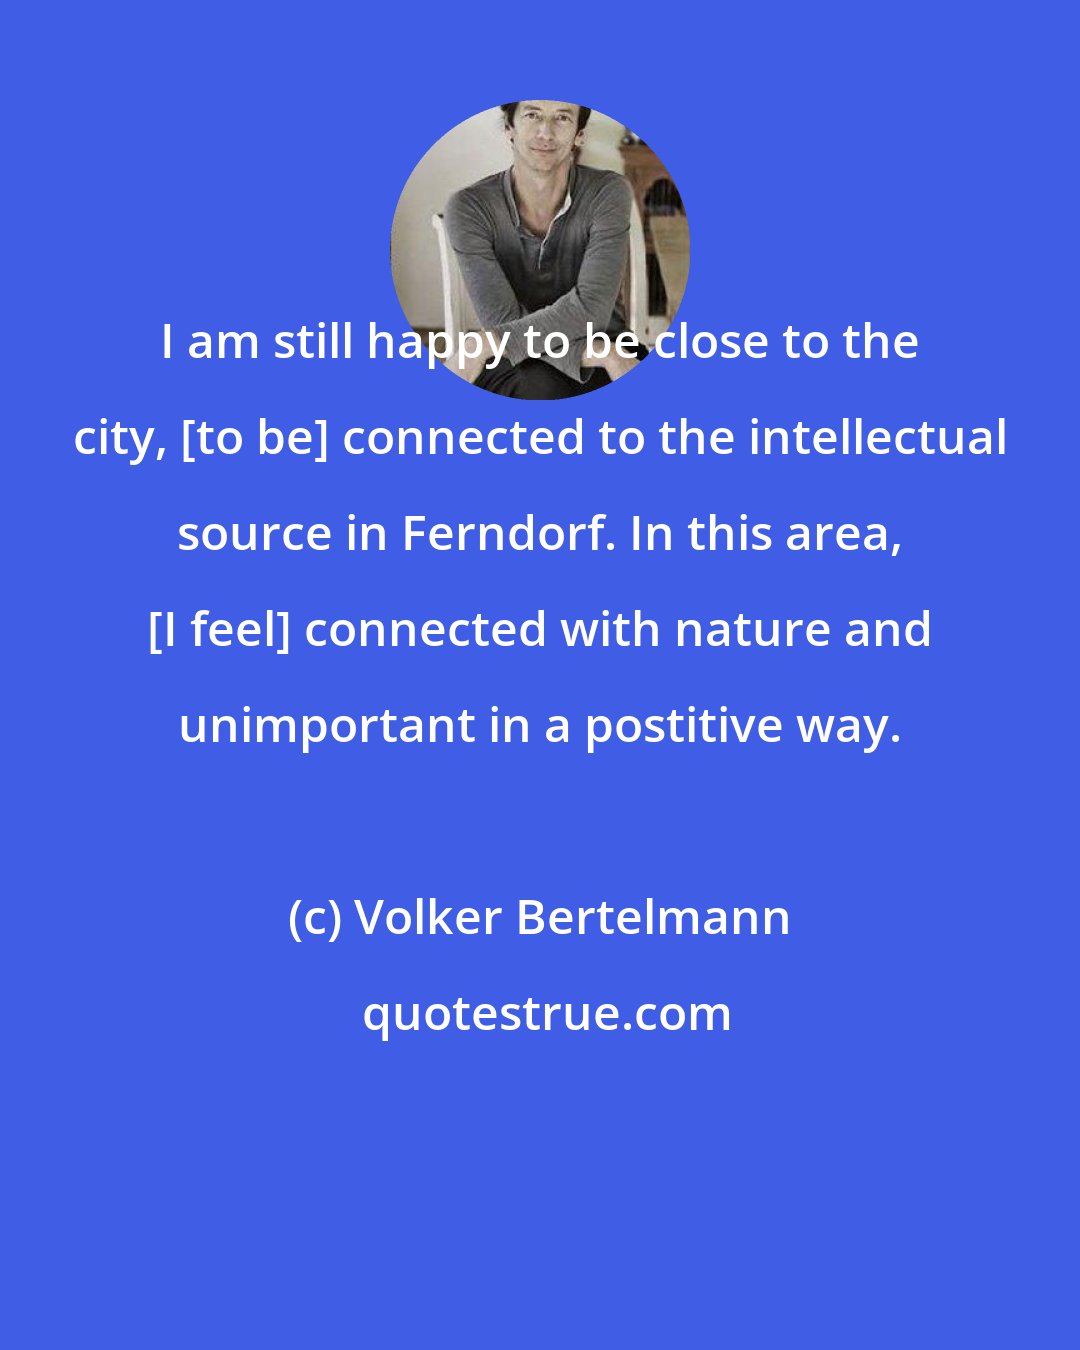 Volker Bertelmann: I am still happy to be close to the city, [to be] connected to the intellectual source in Ferndorf. In this area, [I feel] connected with nature and unimportant in a postitive way.